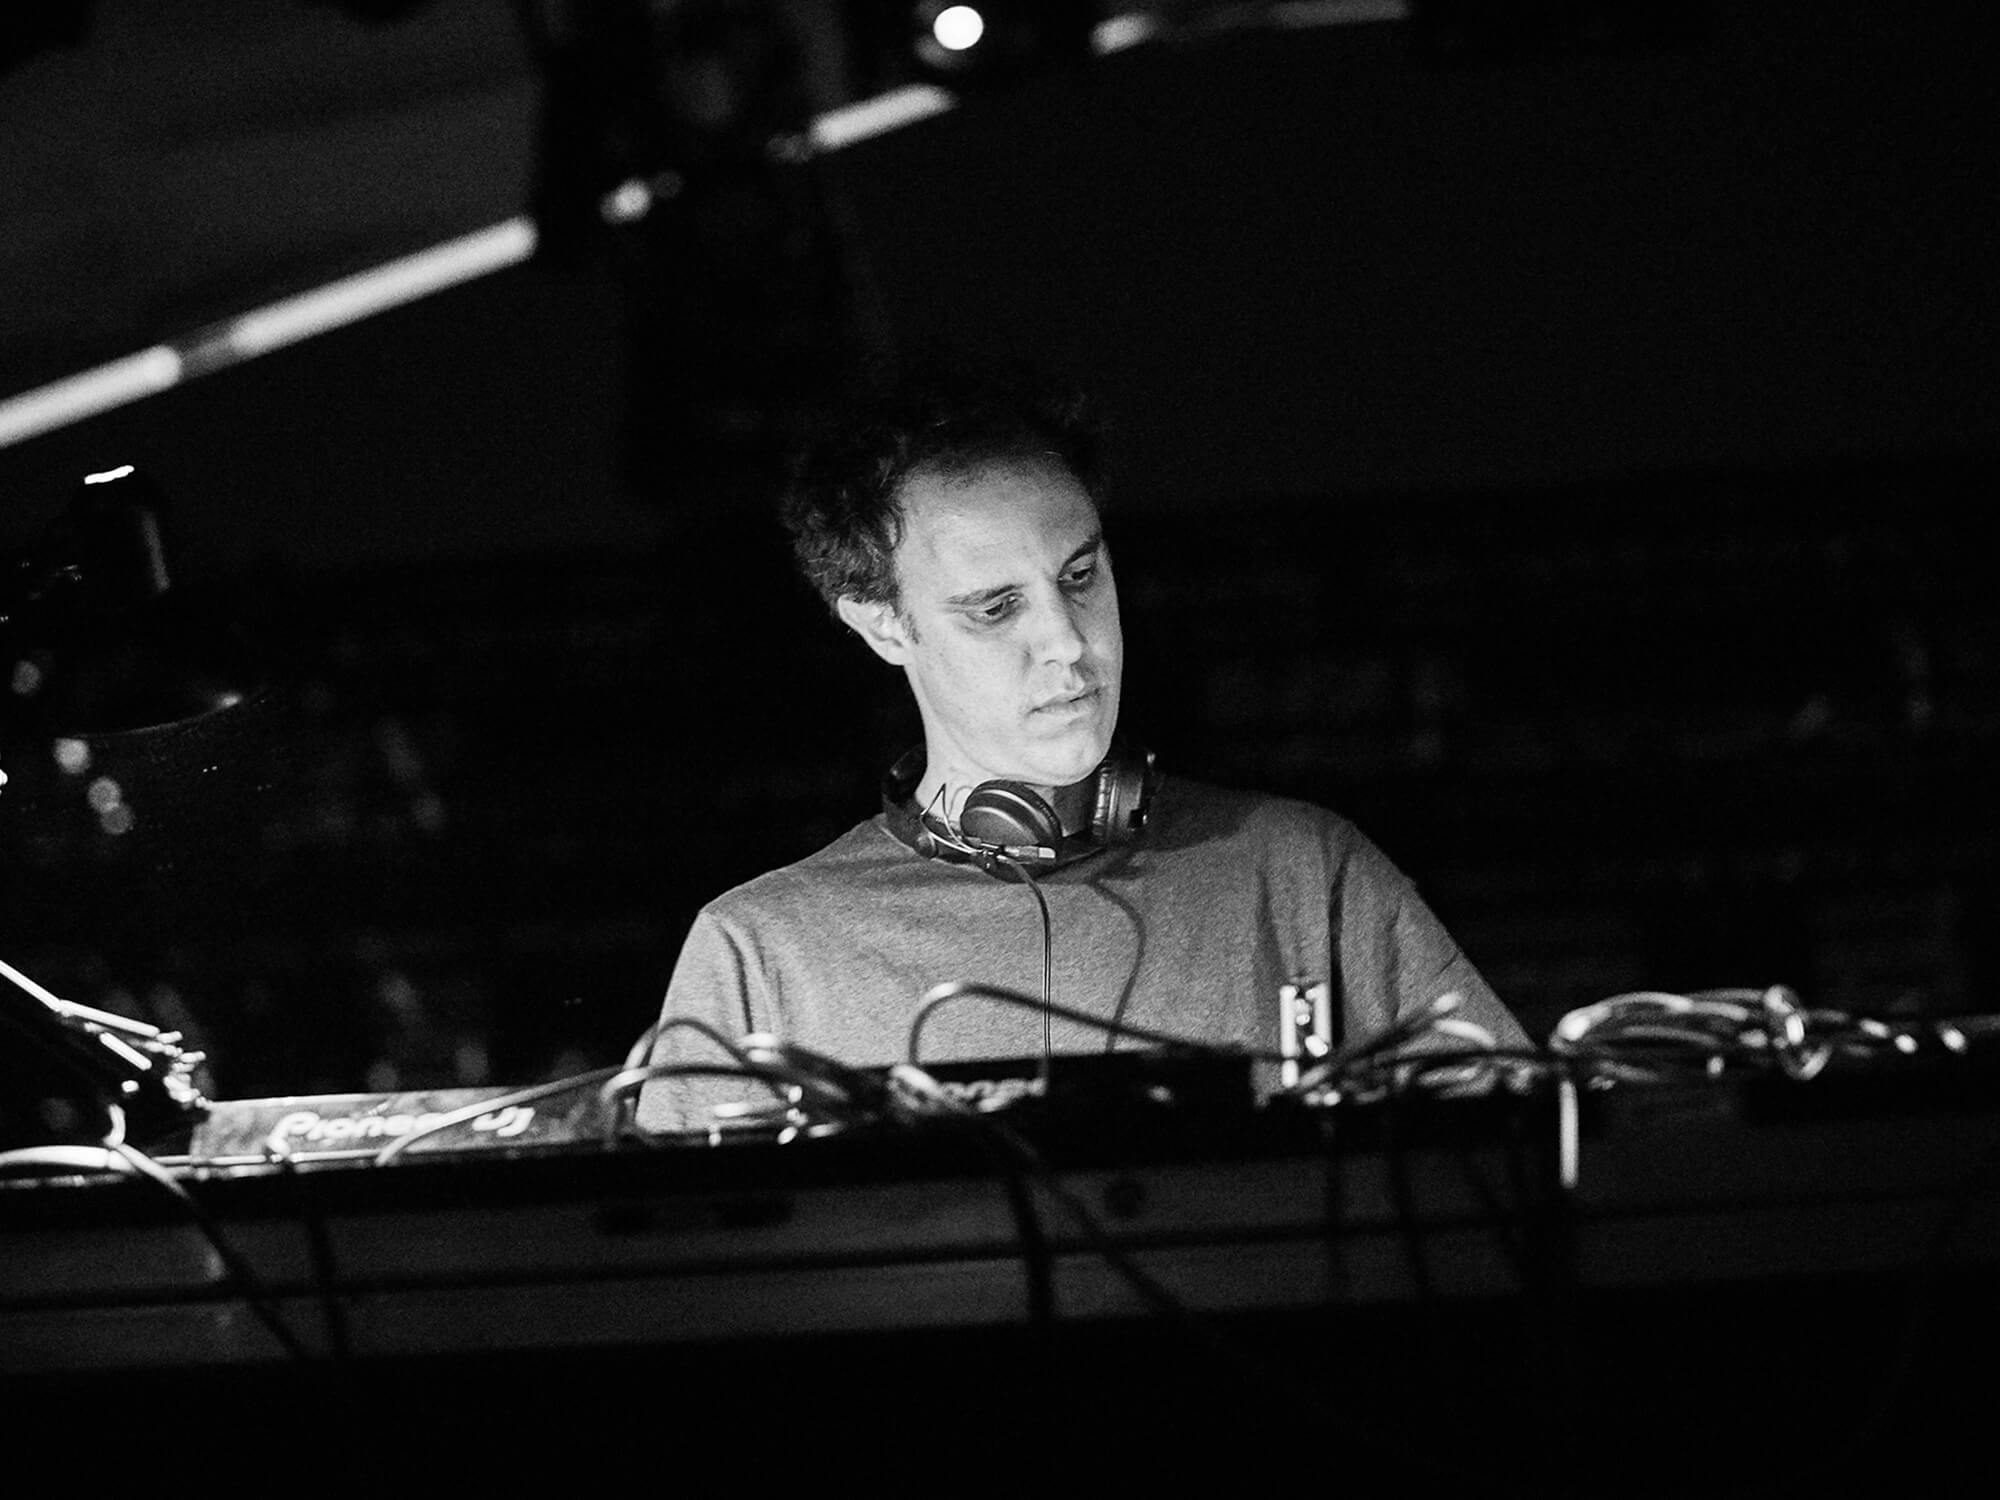 Four Tet performing at Coachella in 2019, photo by Koury Angelo/Rolling Stone/Penske Media via Getty Images